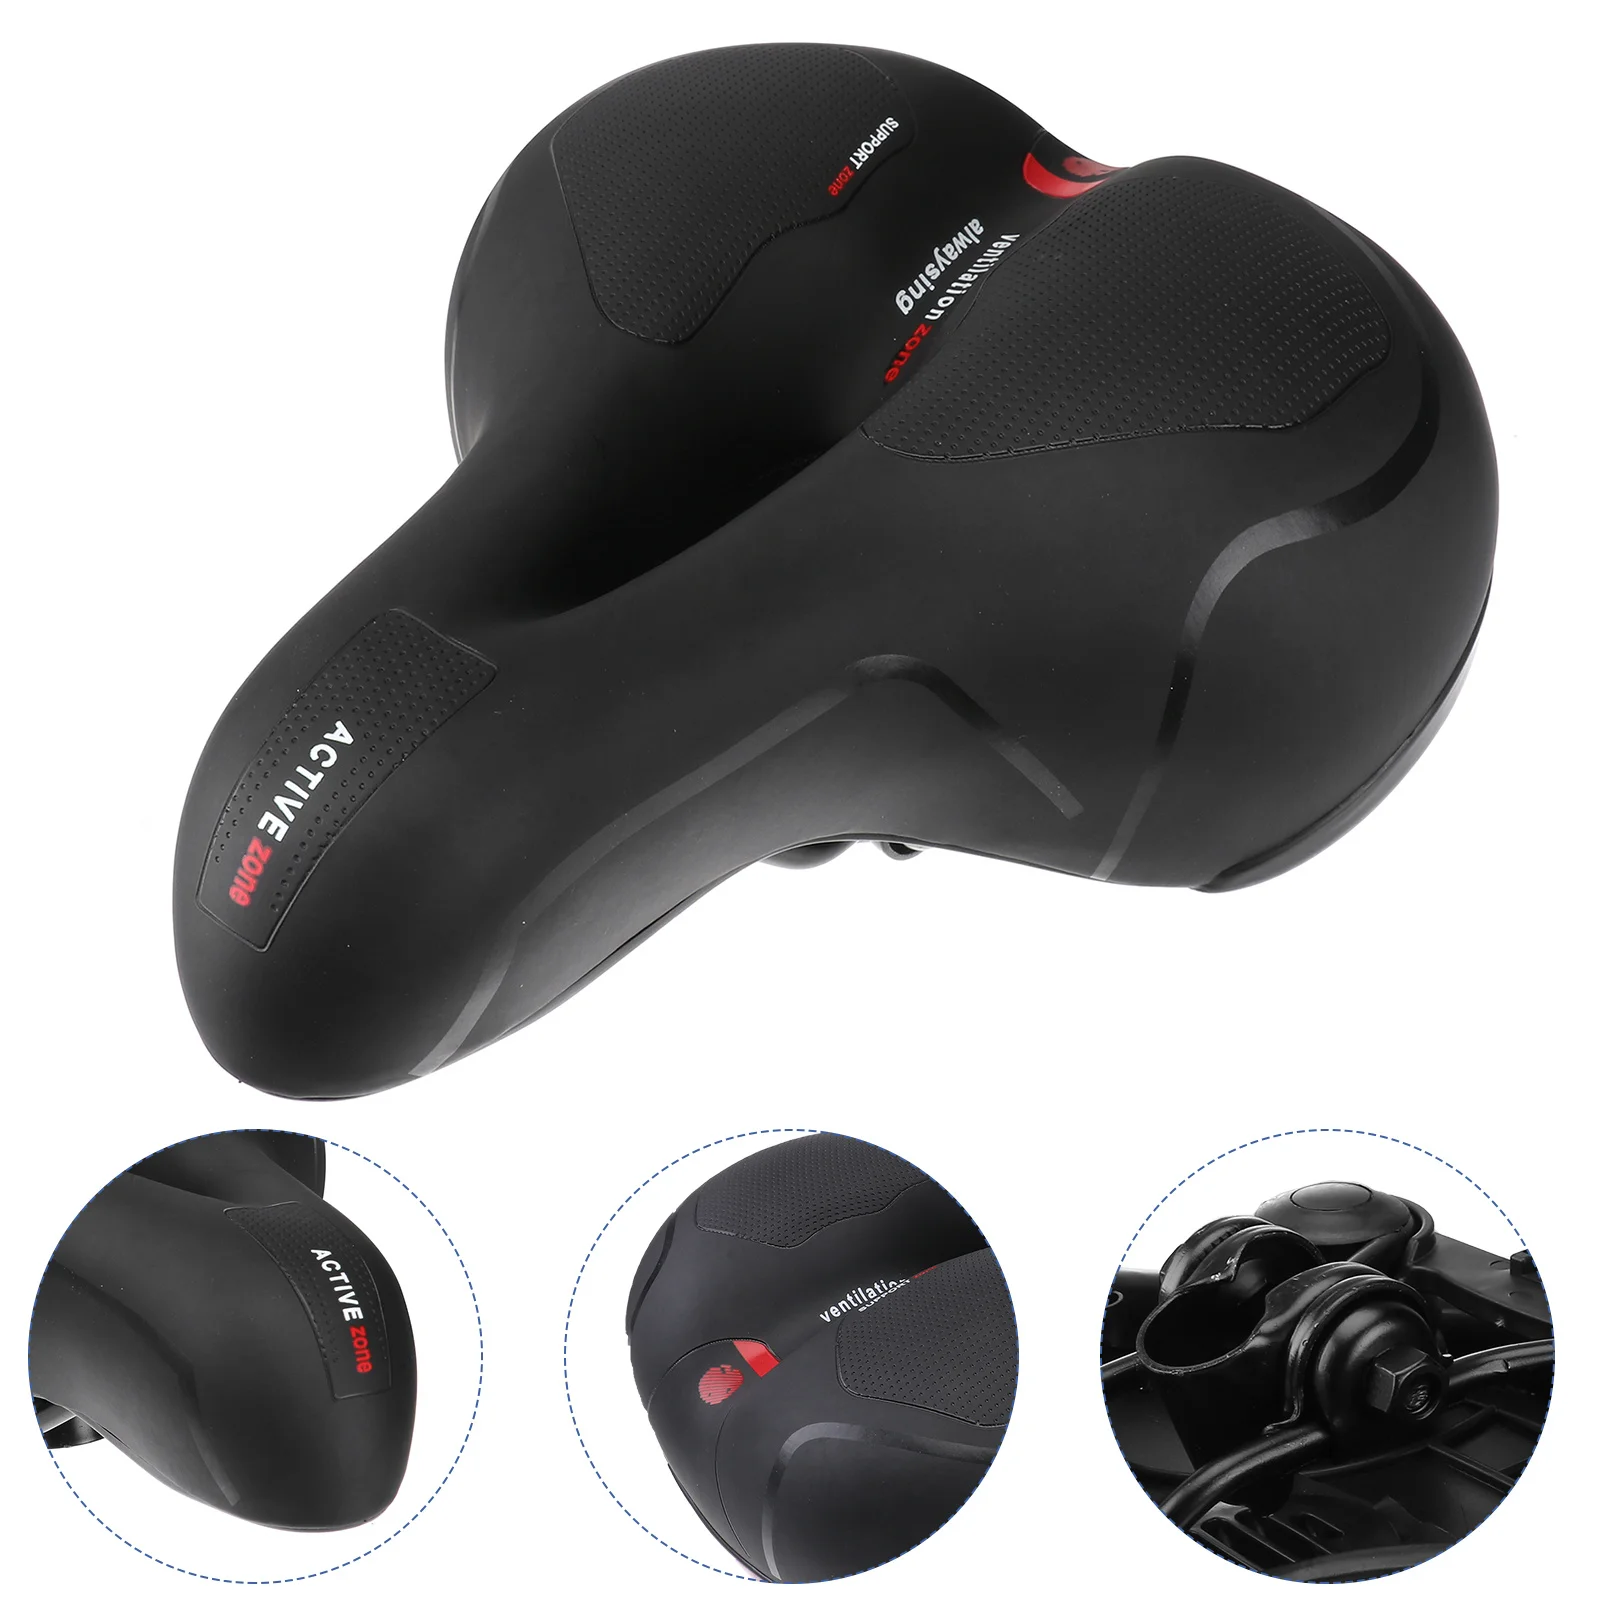 

Bike Seat Absorbing Comfortable Wide Padded Replacement Saddle with Suspension Ball Design